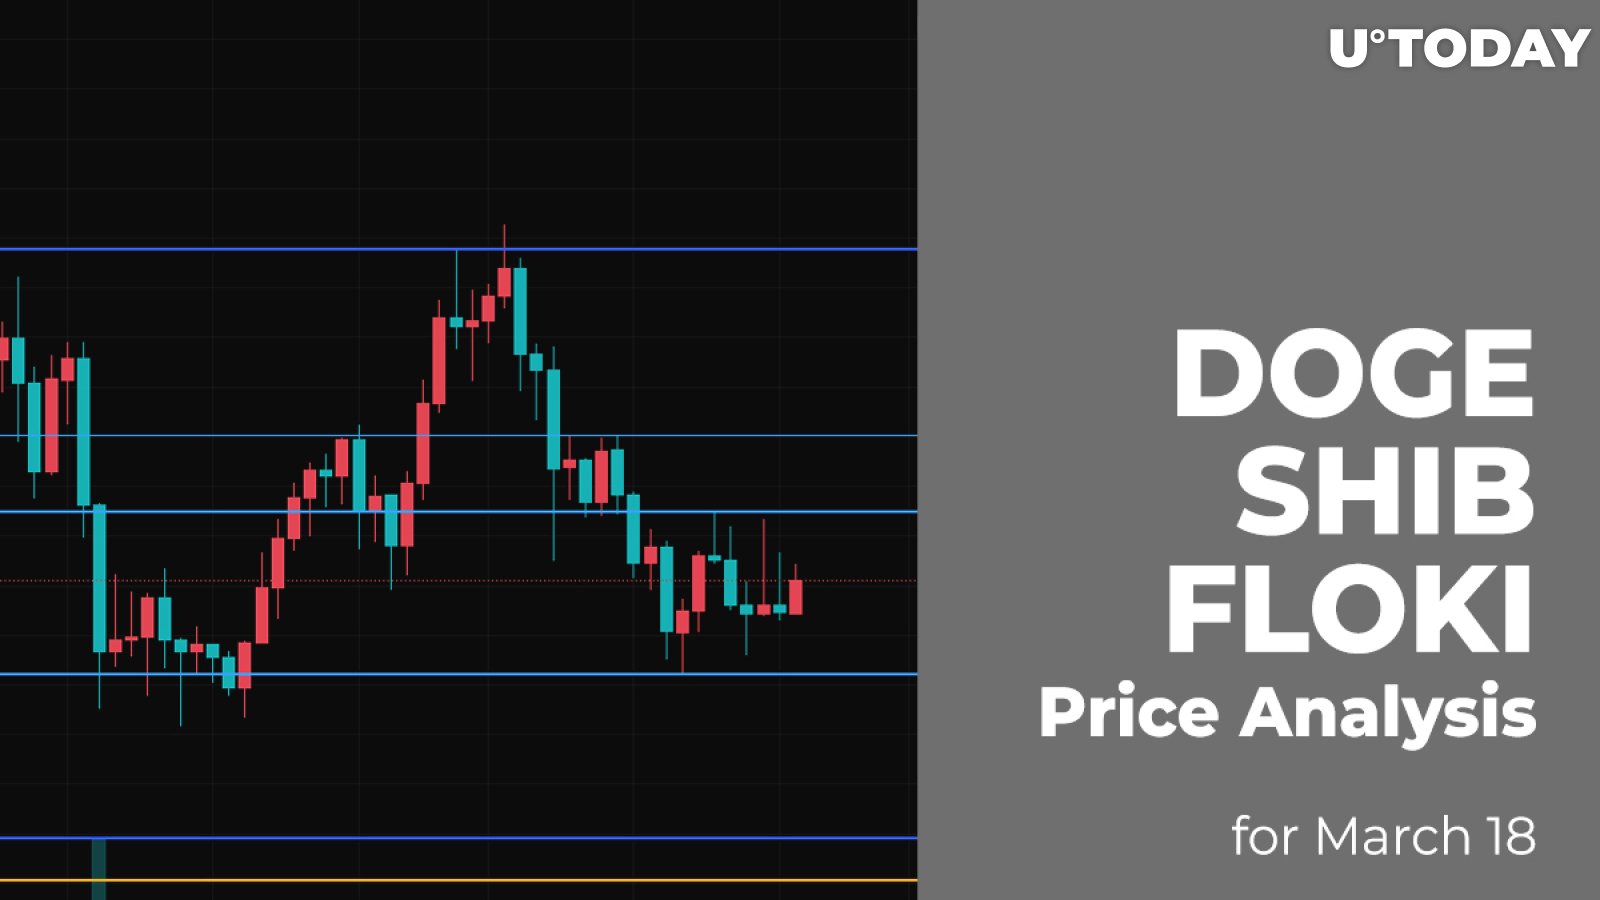 DOGE, SHIB and FLOKI Price Analysis for March 18